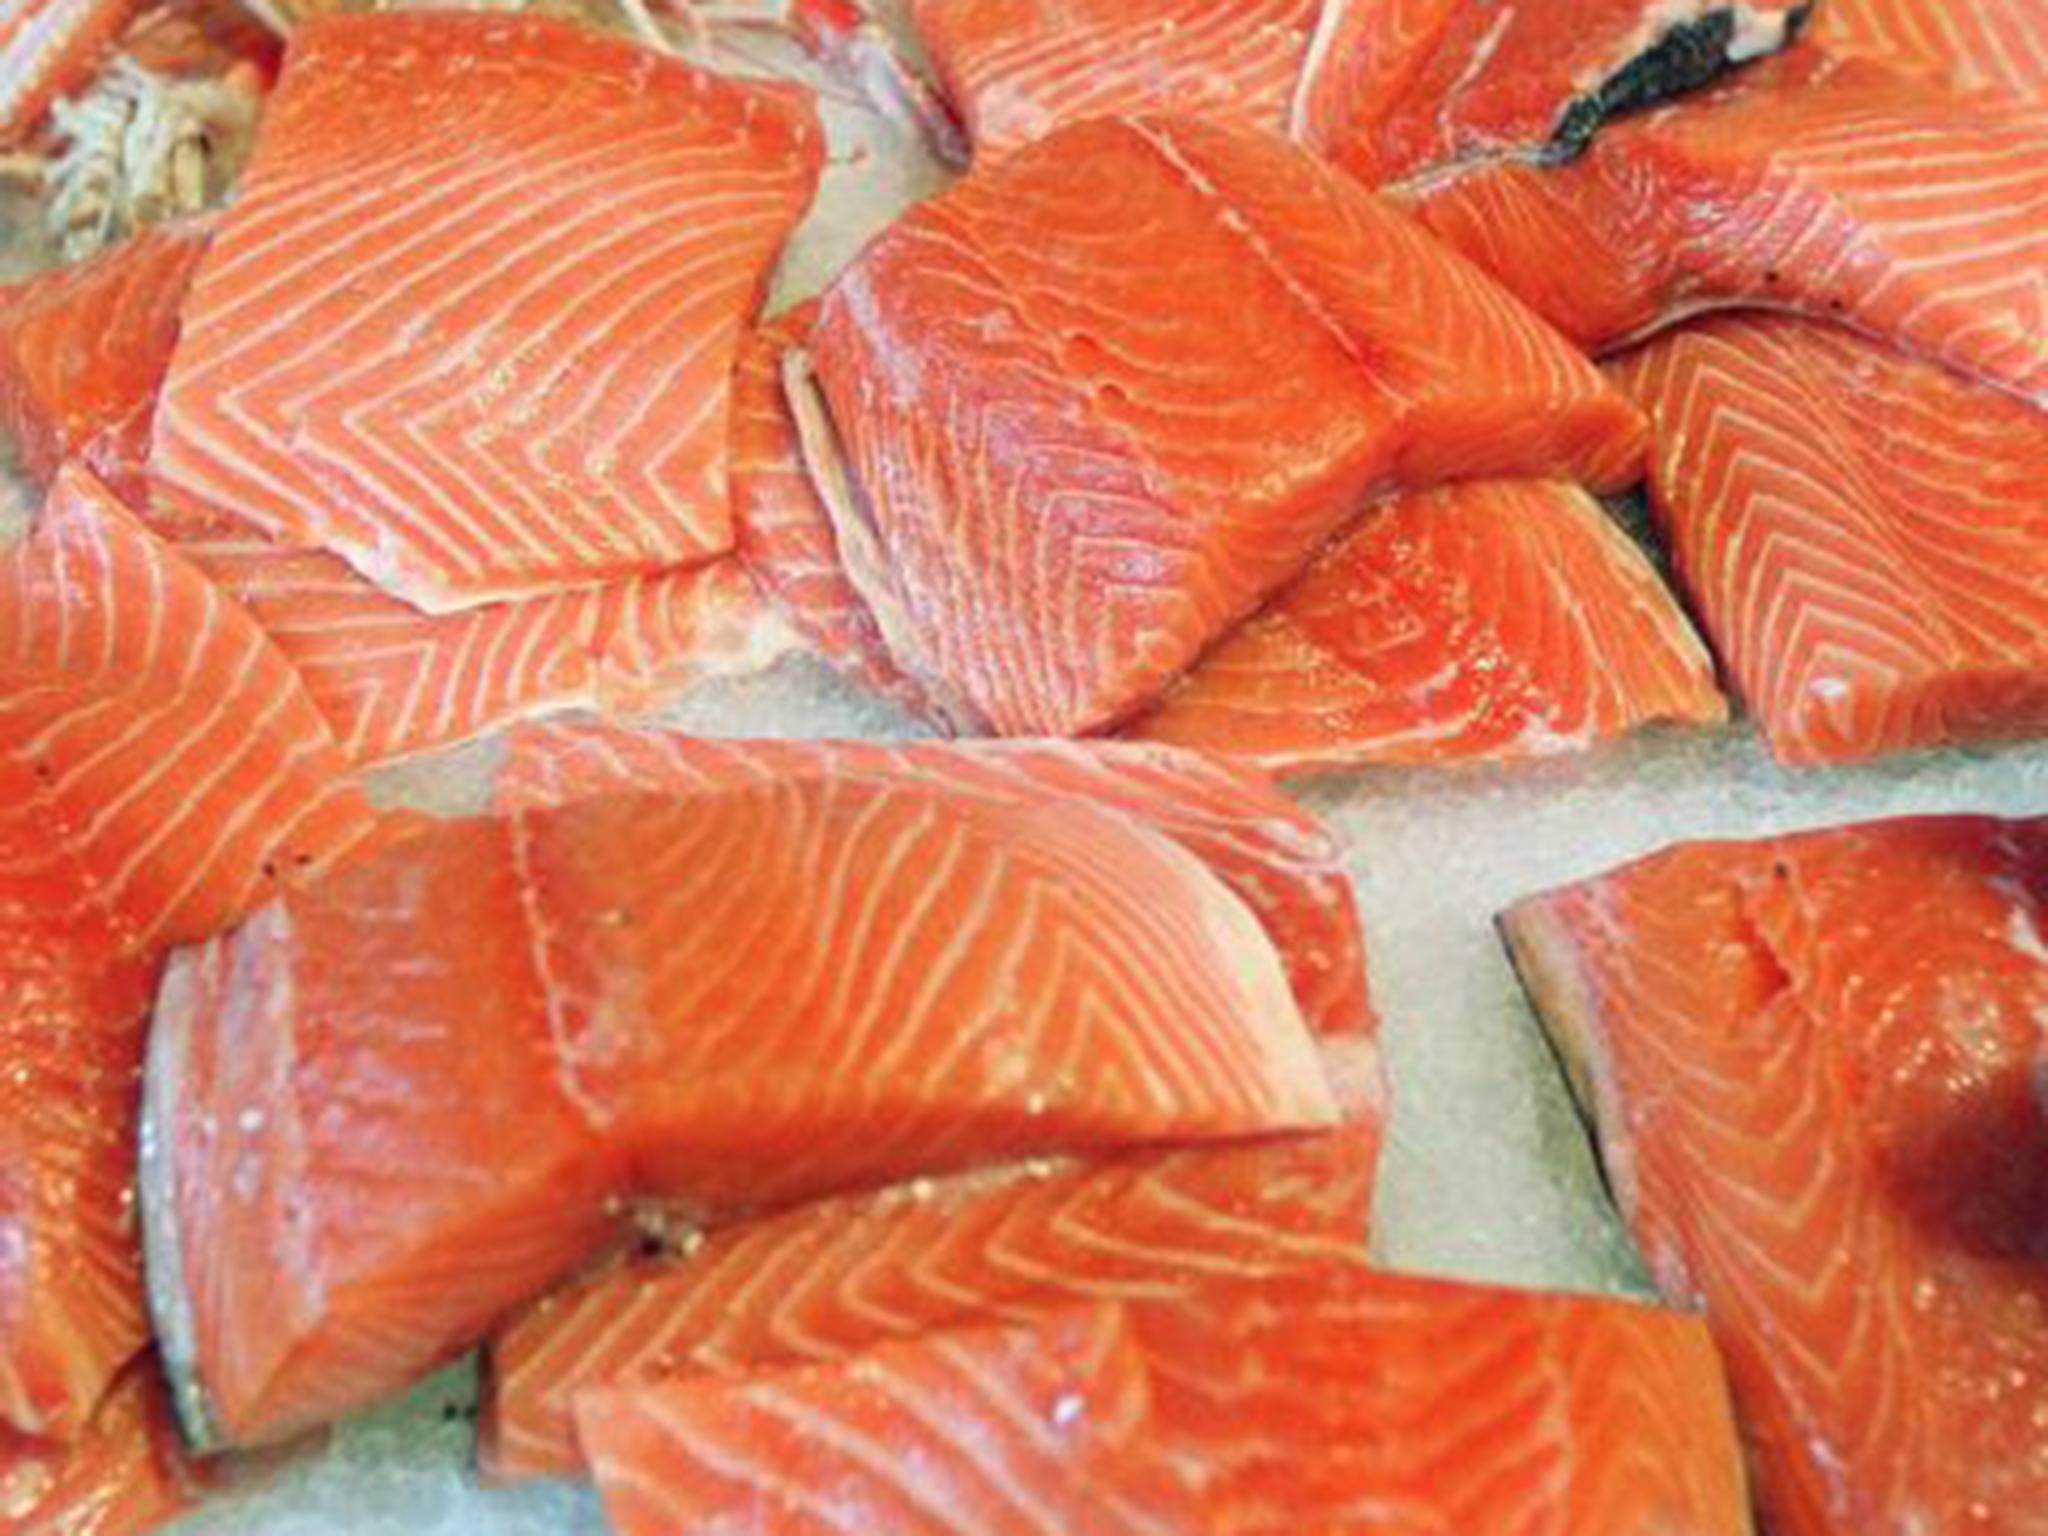 The best source of vitamin D absorbed through our diet is oily fish (AFP/Getty)